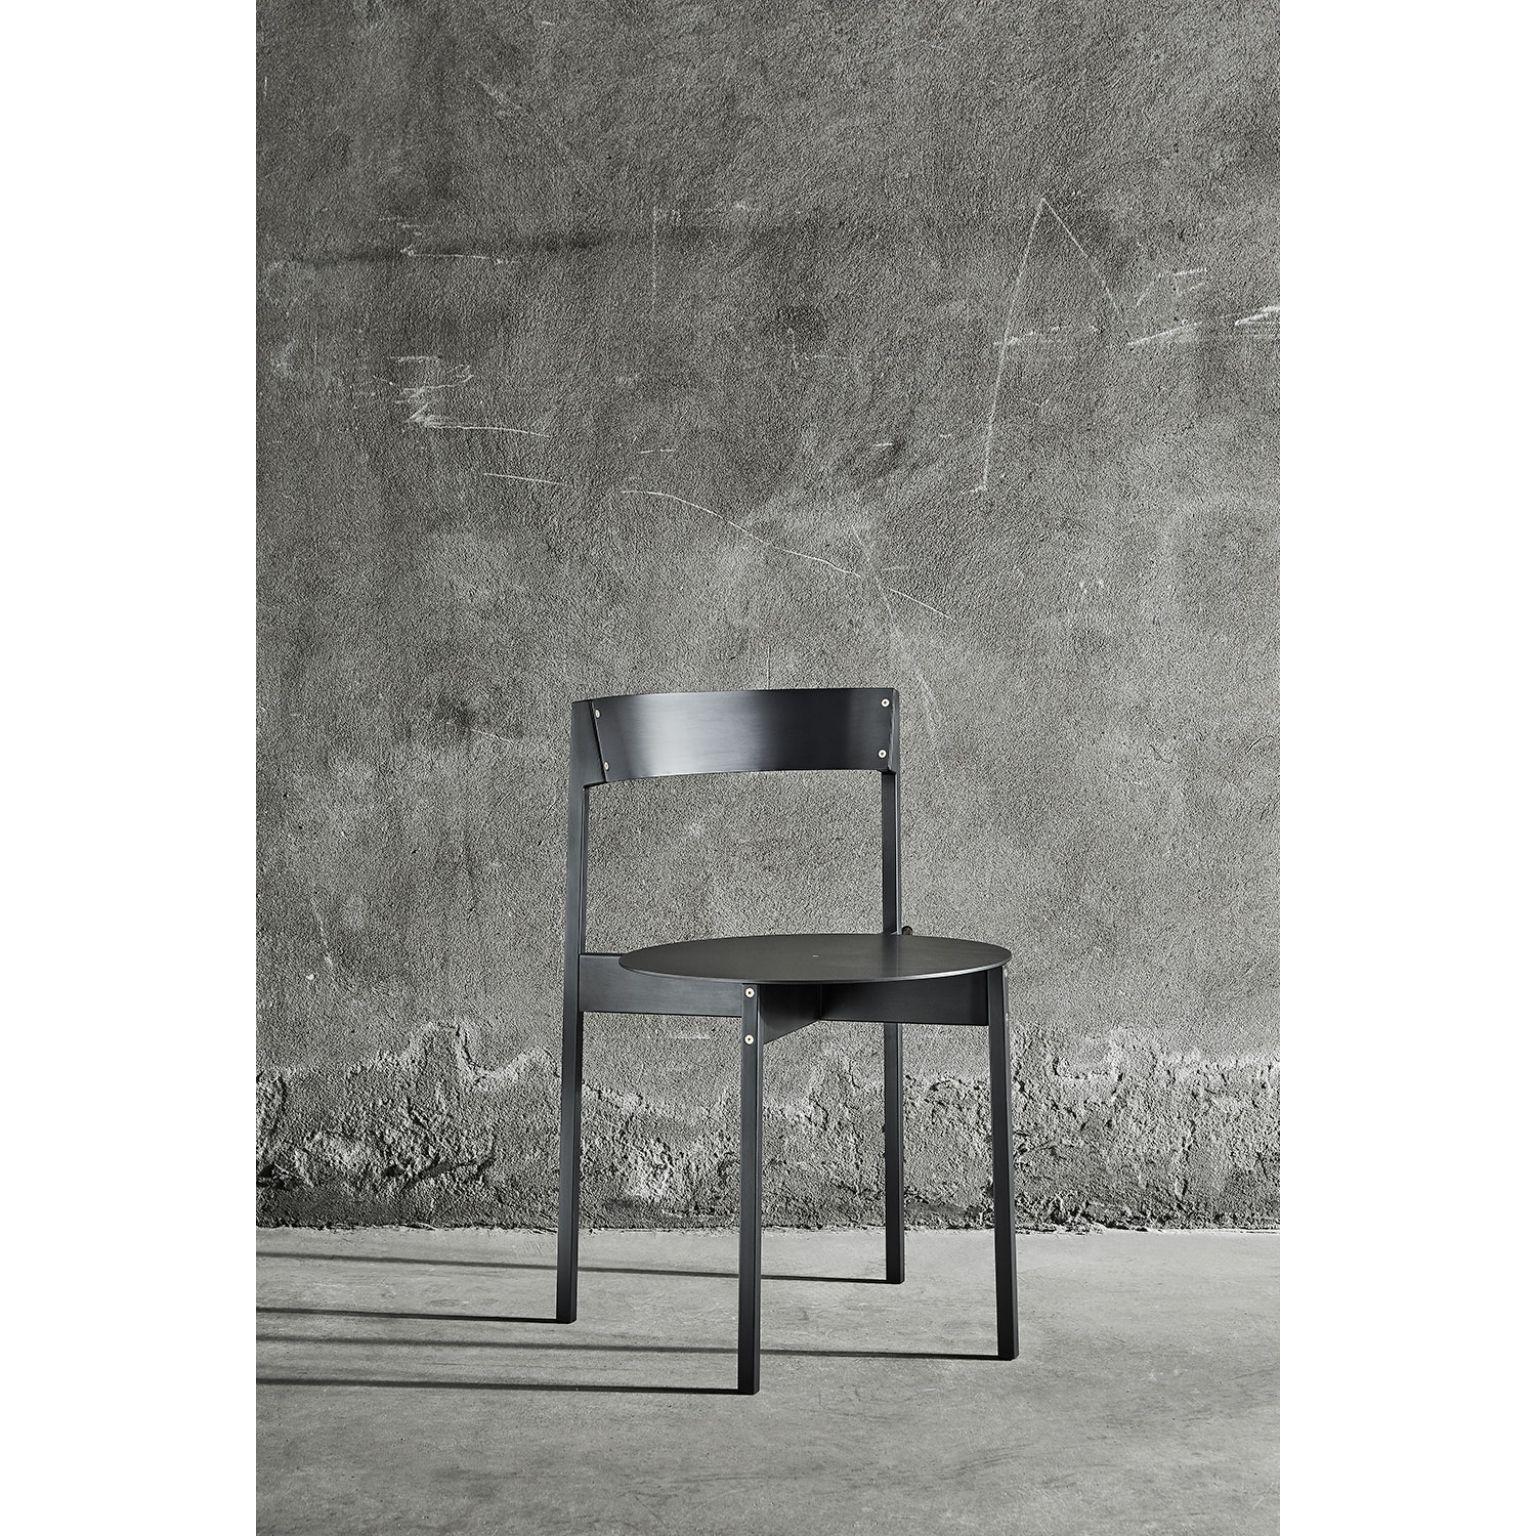 Brugola black chair by Mingardo
Dimensions: D48x W53 x H75 cm 
Materials: Varnished iron frame with brass hex screws

Also Available in different finishes.

Last November, we had the opportunity to design for Mingardo, and we immediately